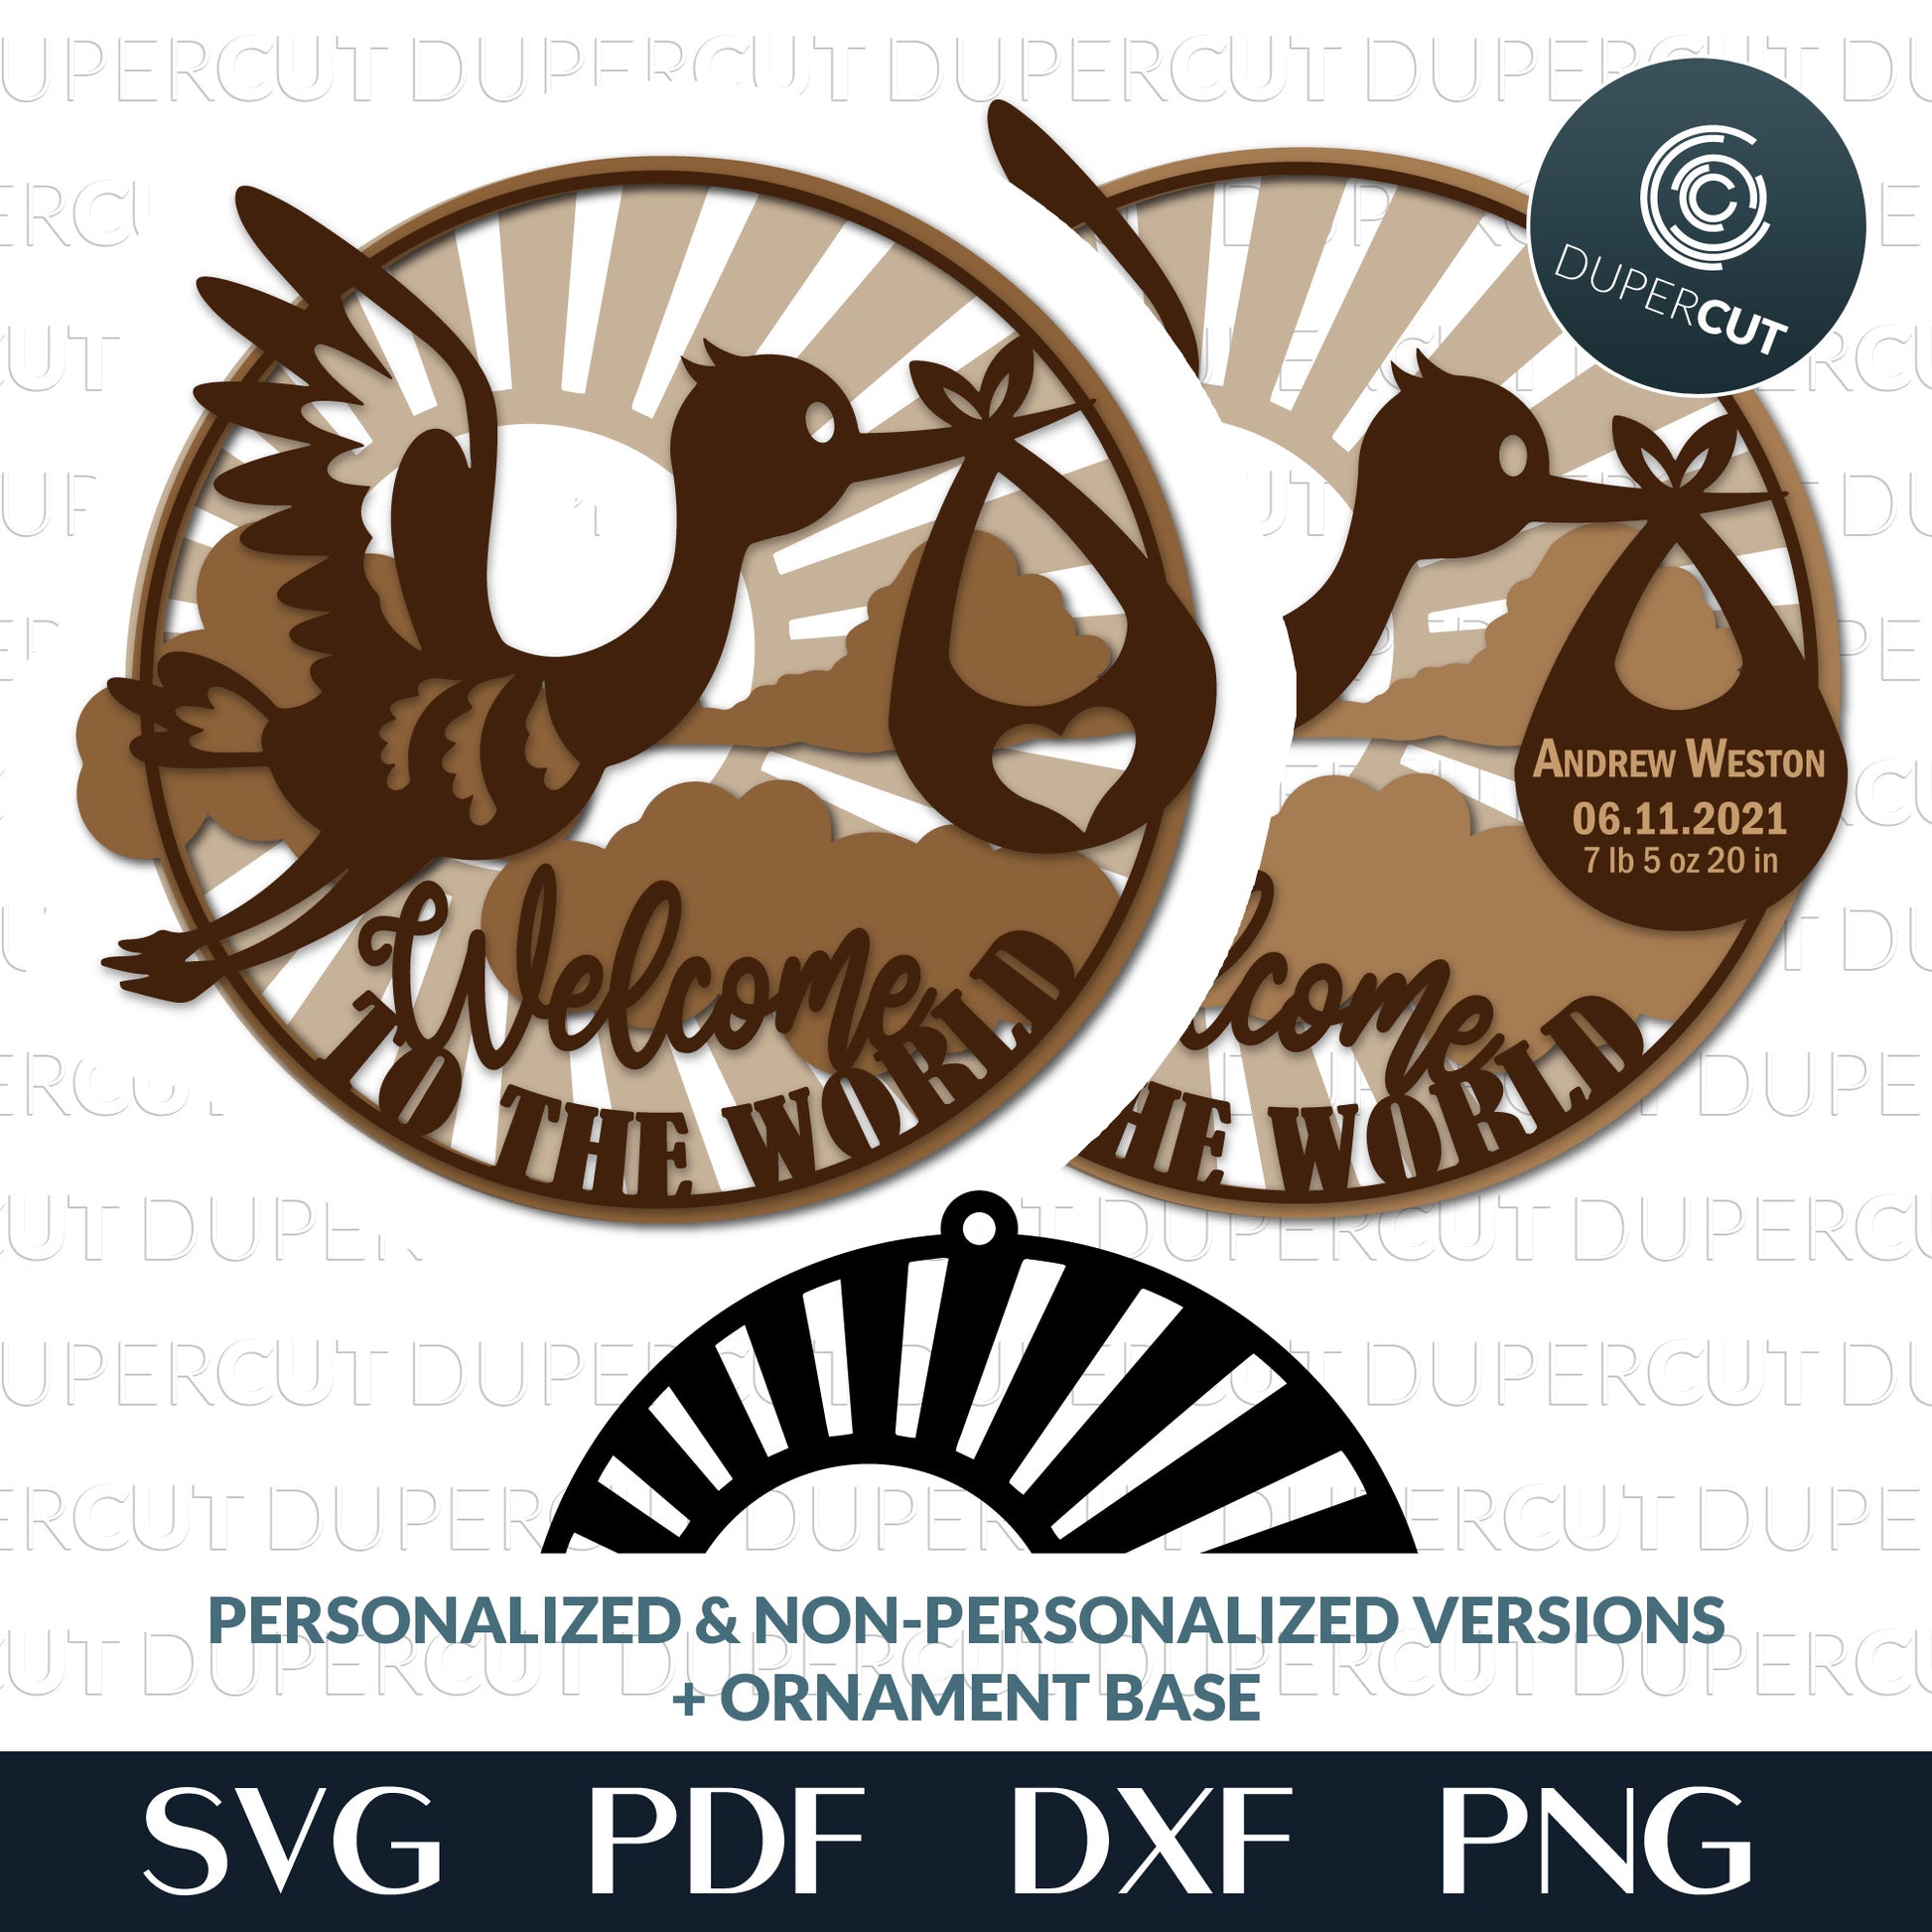 Stork with newborn baby - personalized Christmas ornament - layered laser files SVG PDF DXF for cutting with Glowforge, Cricut, Silhouette Cameo, CNC machines